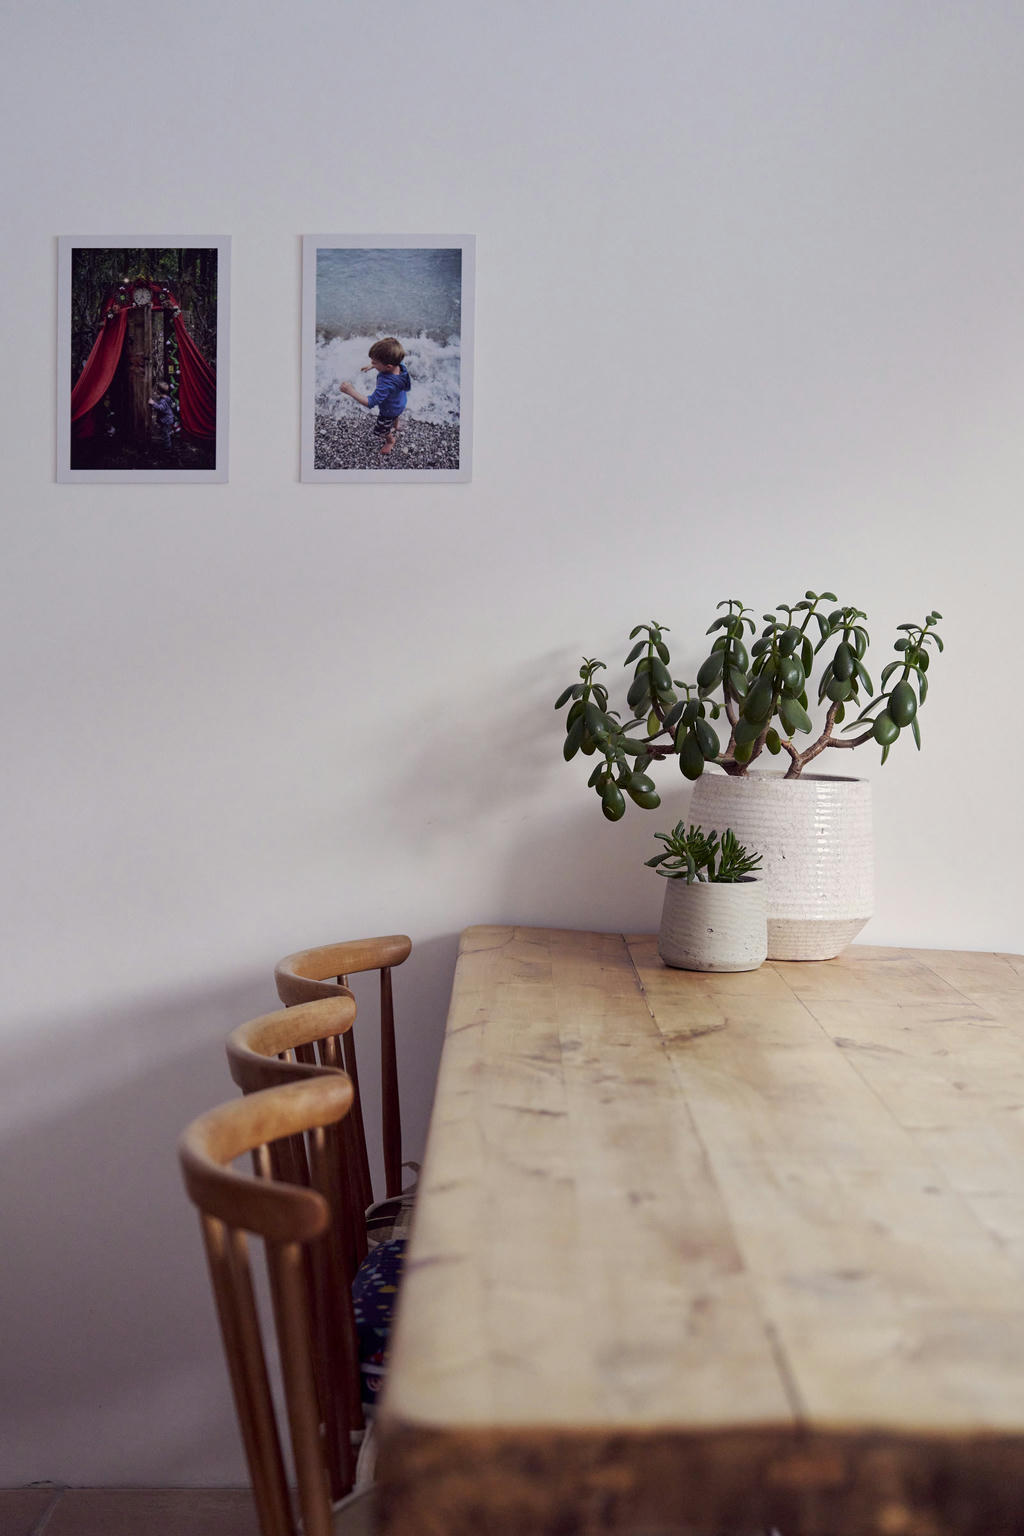 A table, three chairs, two photos on the wall and some plants